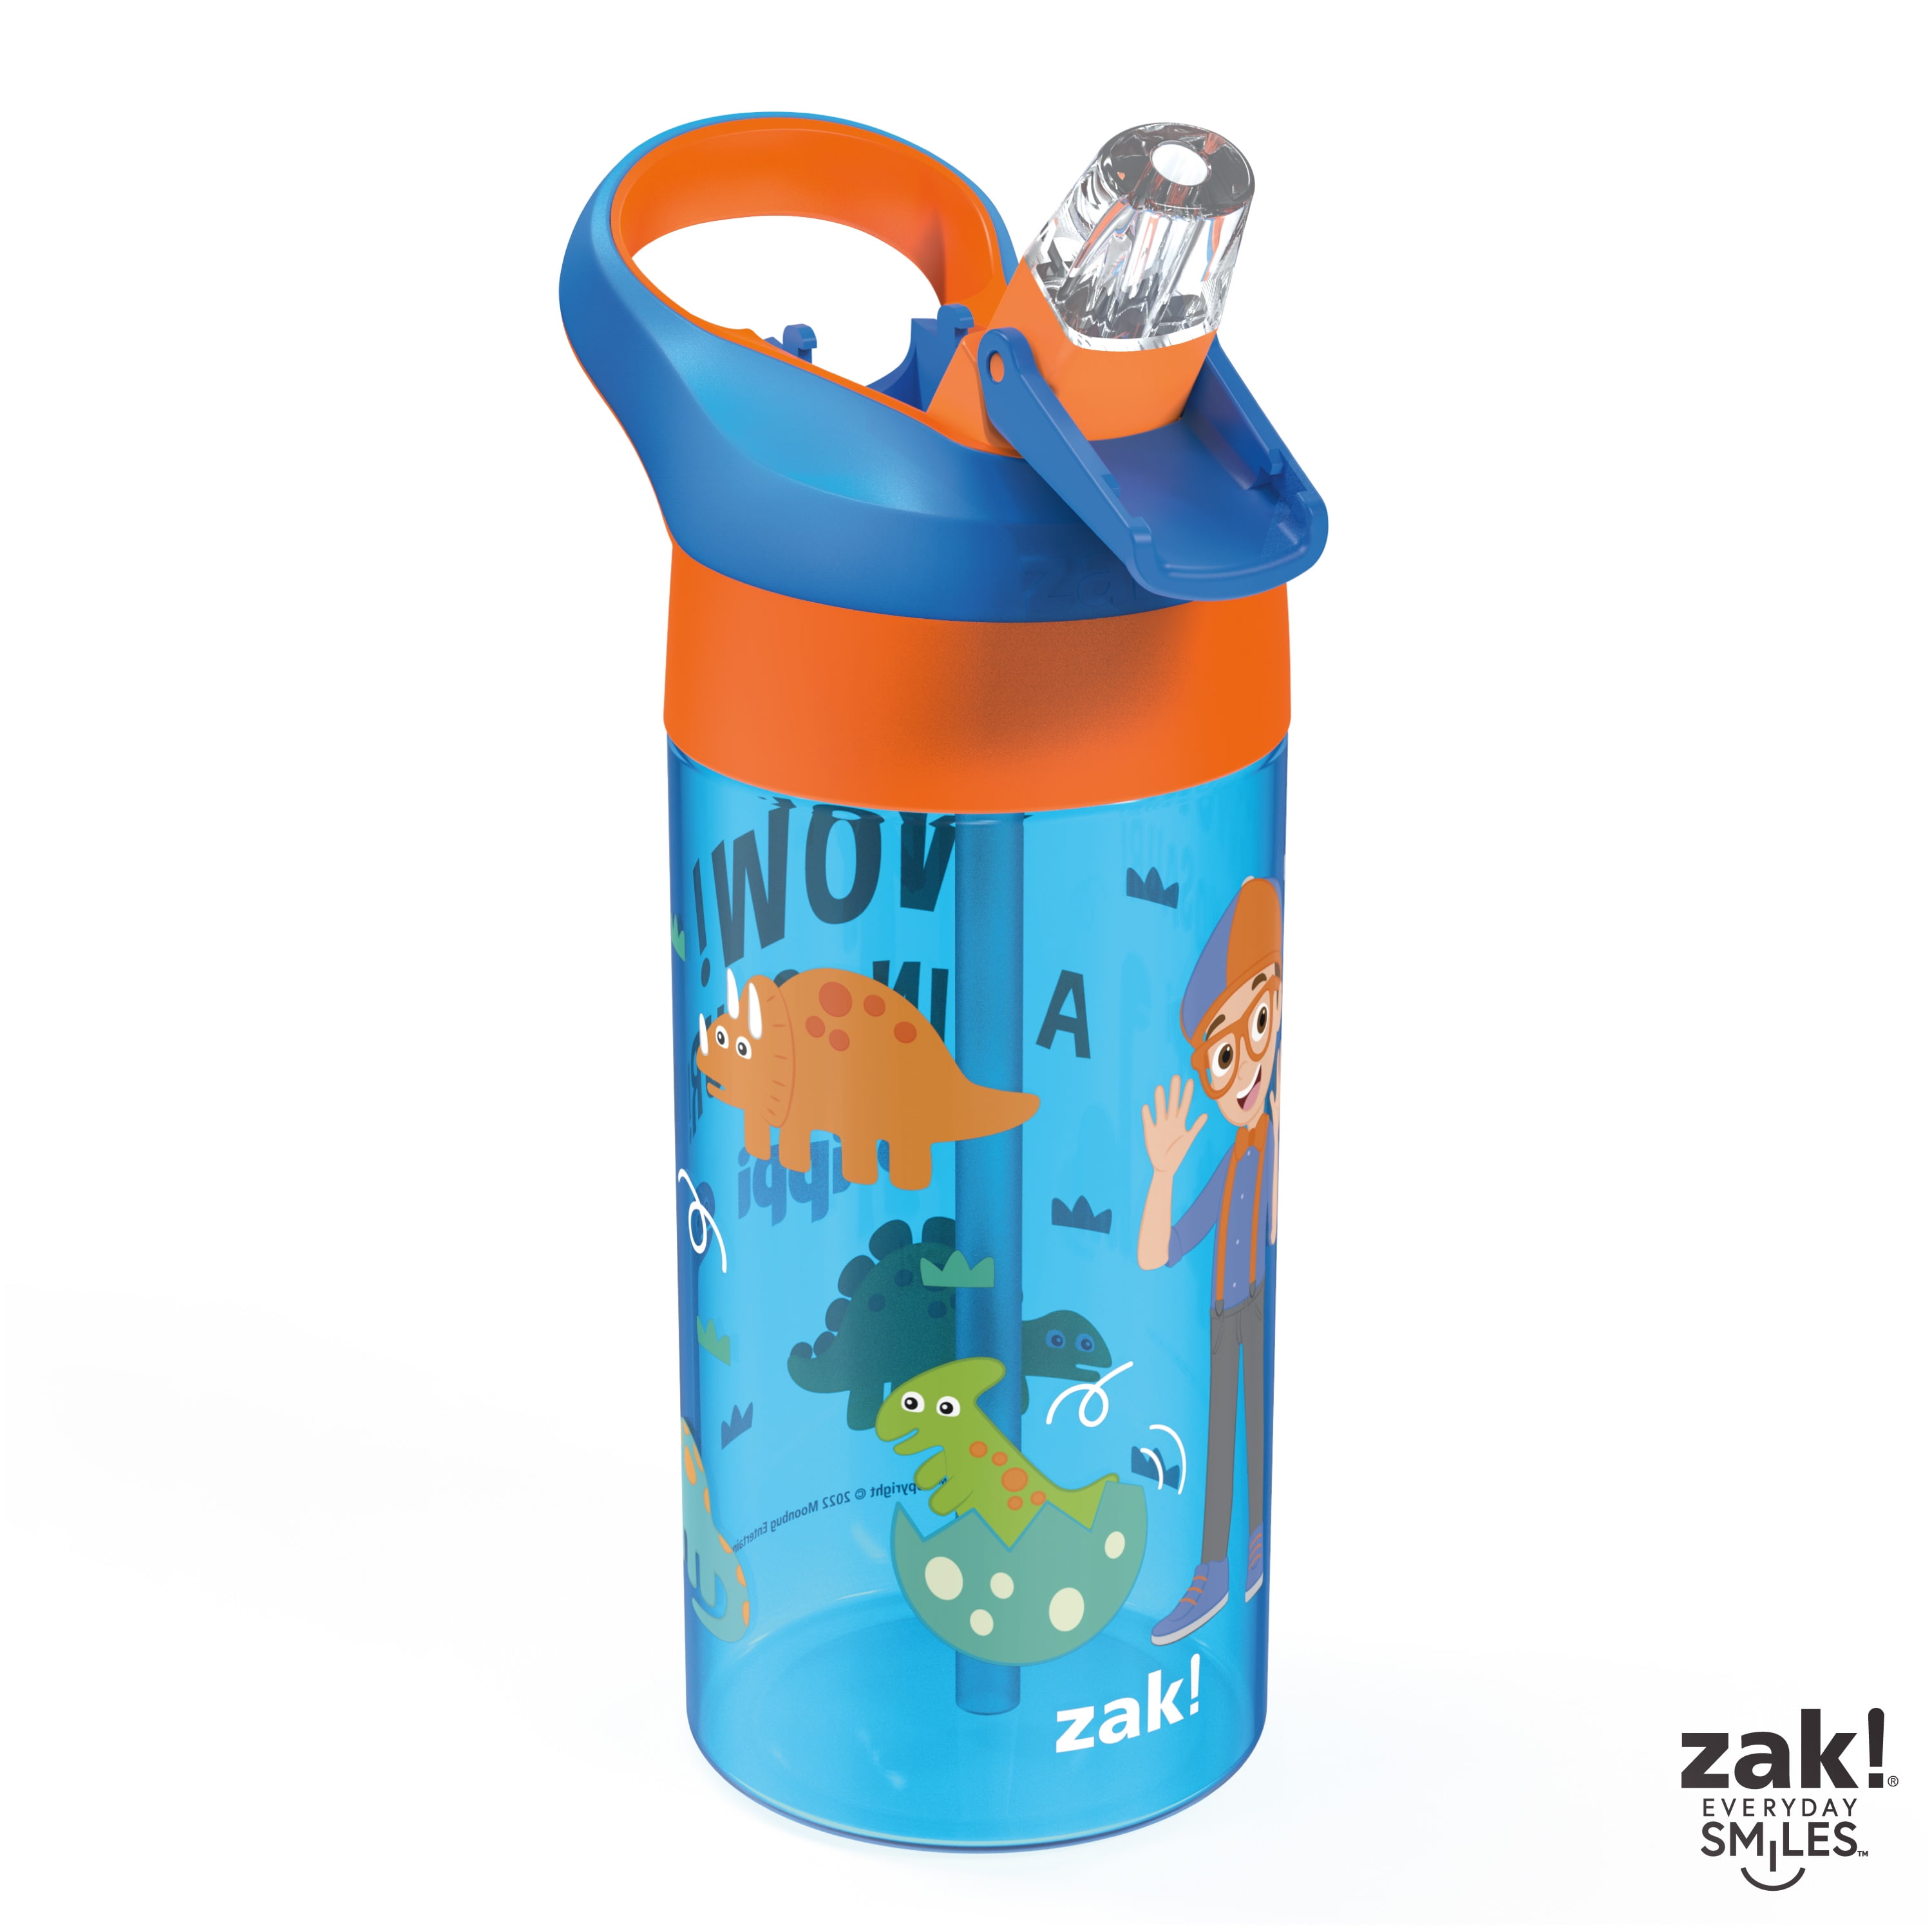 Blippi Kids Leak Proof Water Bottle with Push Button Lid and Spout - 17.5  Ounces —